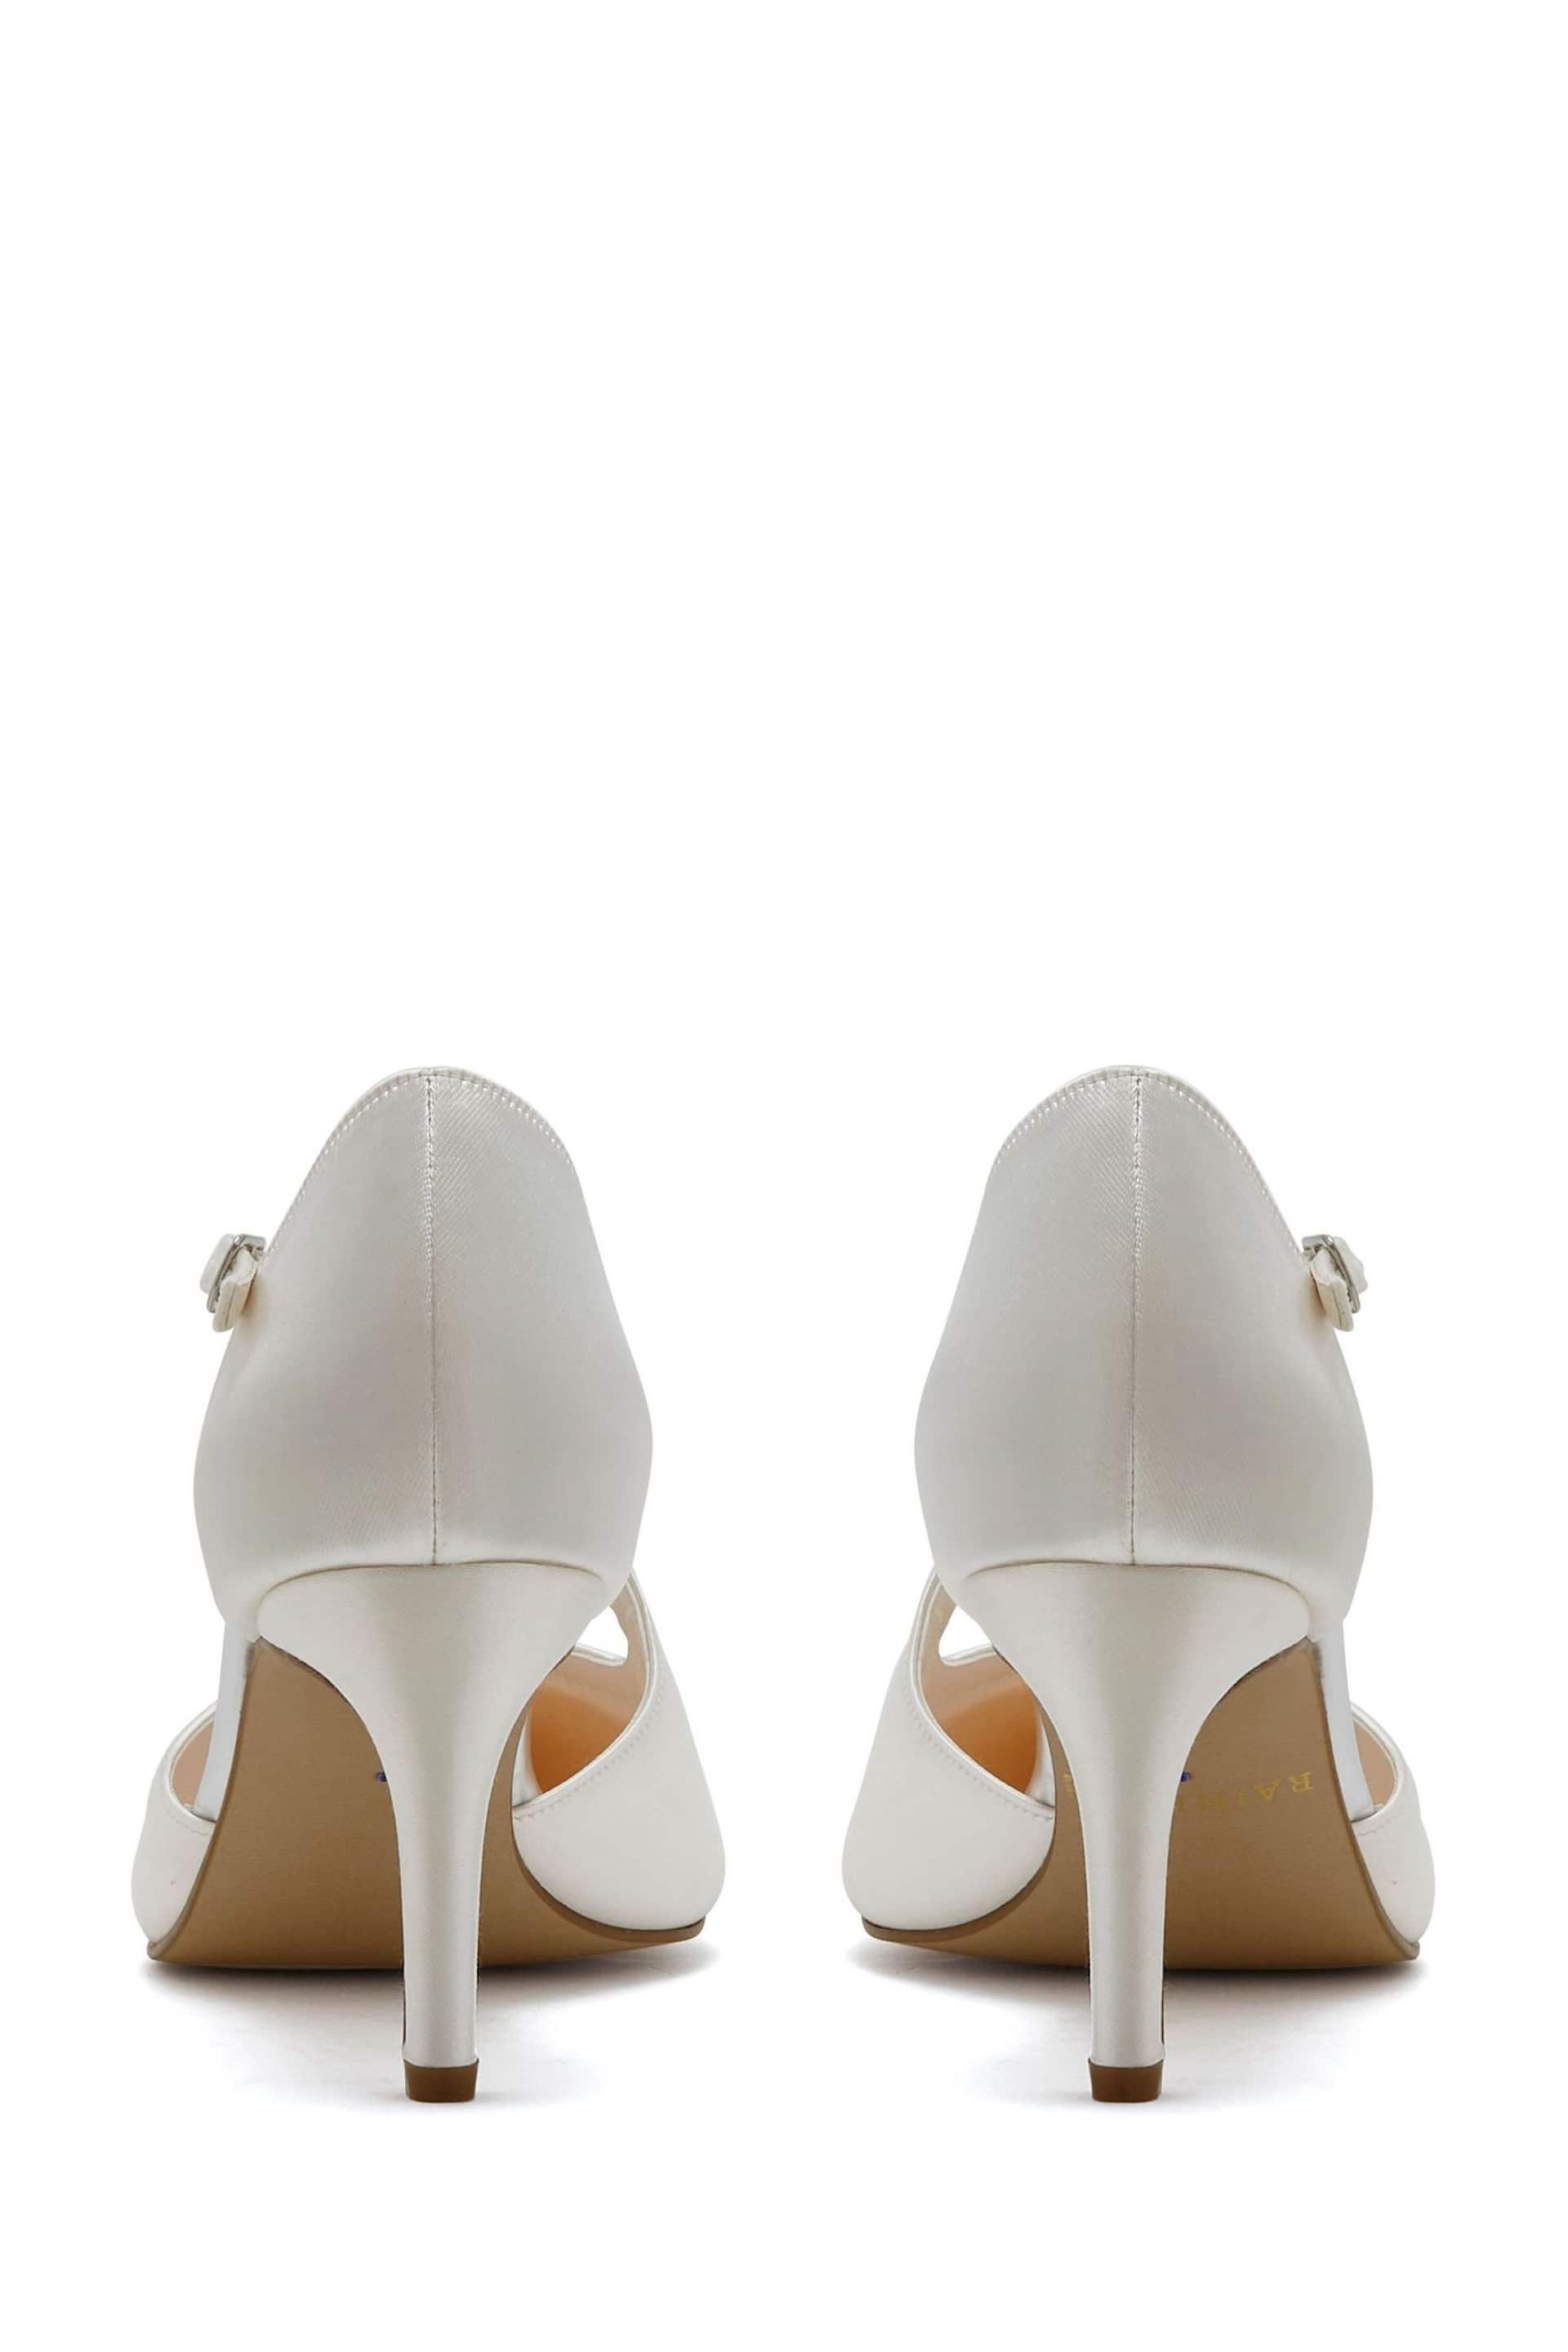 Rainbow Club Natural Raven Ivory Wedding Satin Court Shoes - Image 6 of 7